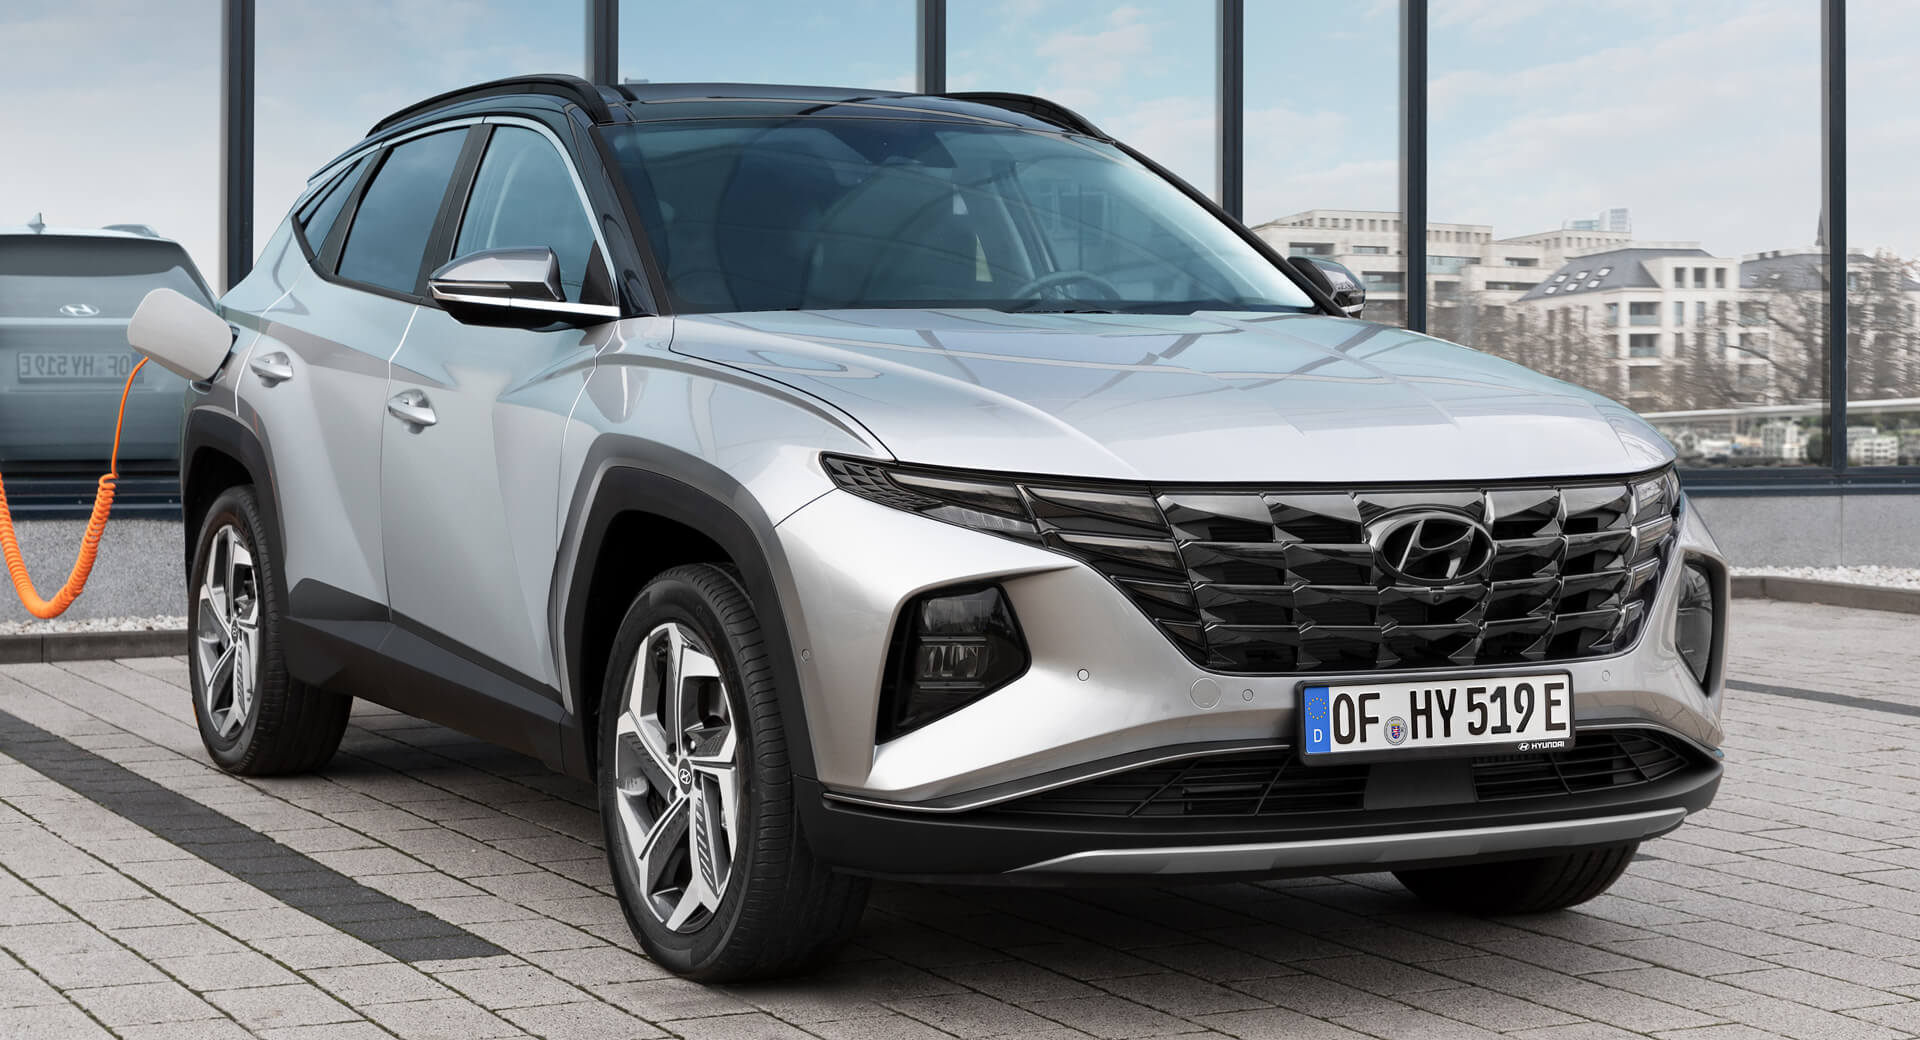 2021 Hyundai Tucson Plug-In Hybrid Lands In The UK With ...